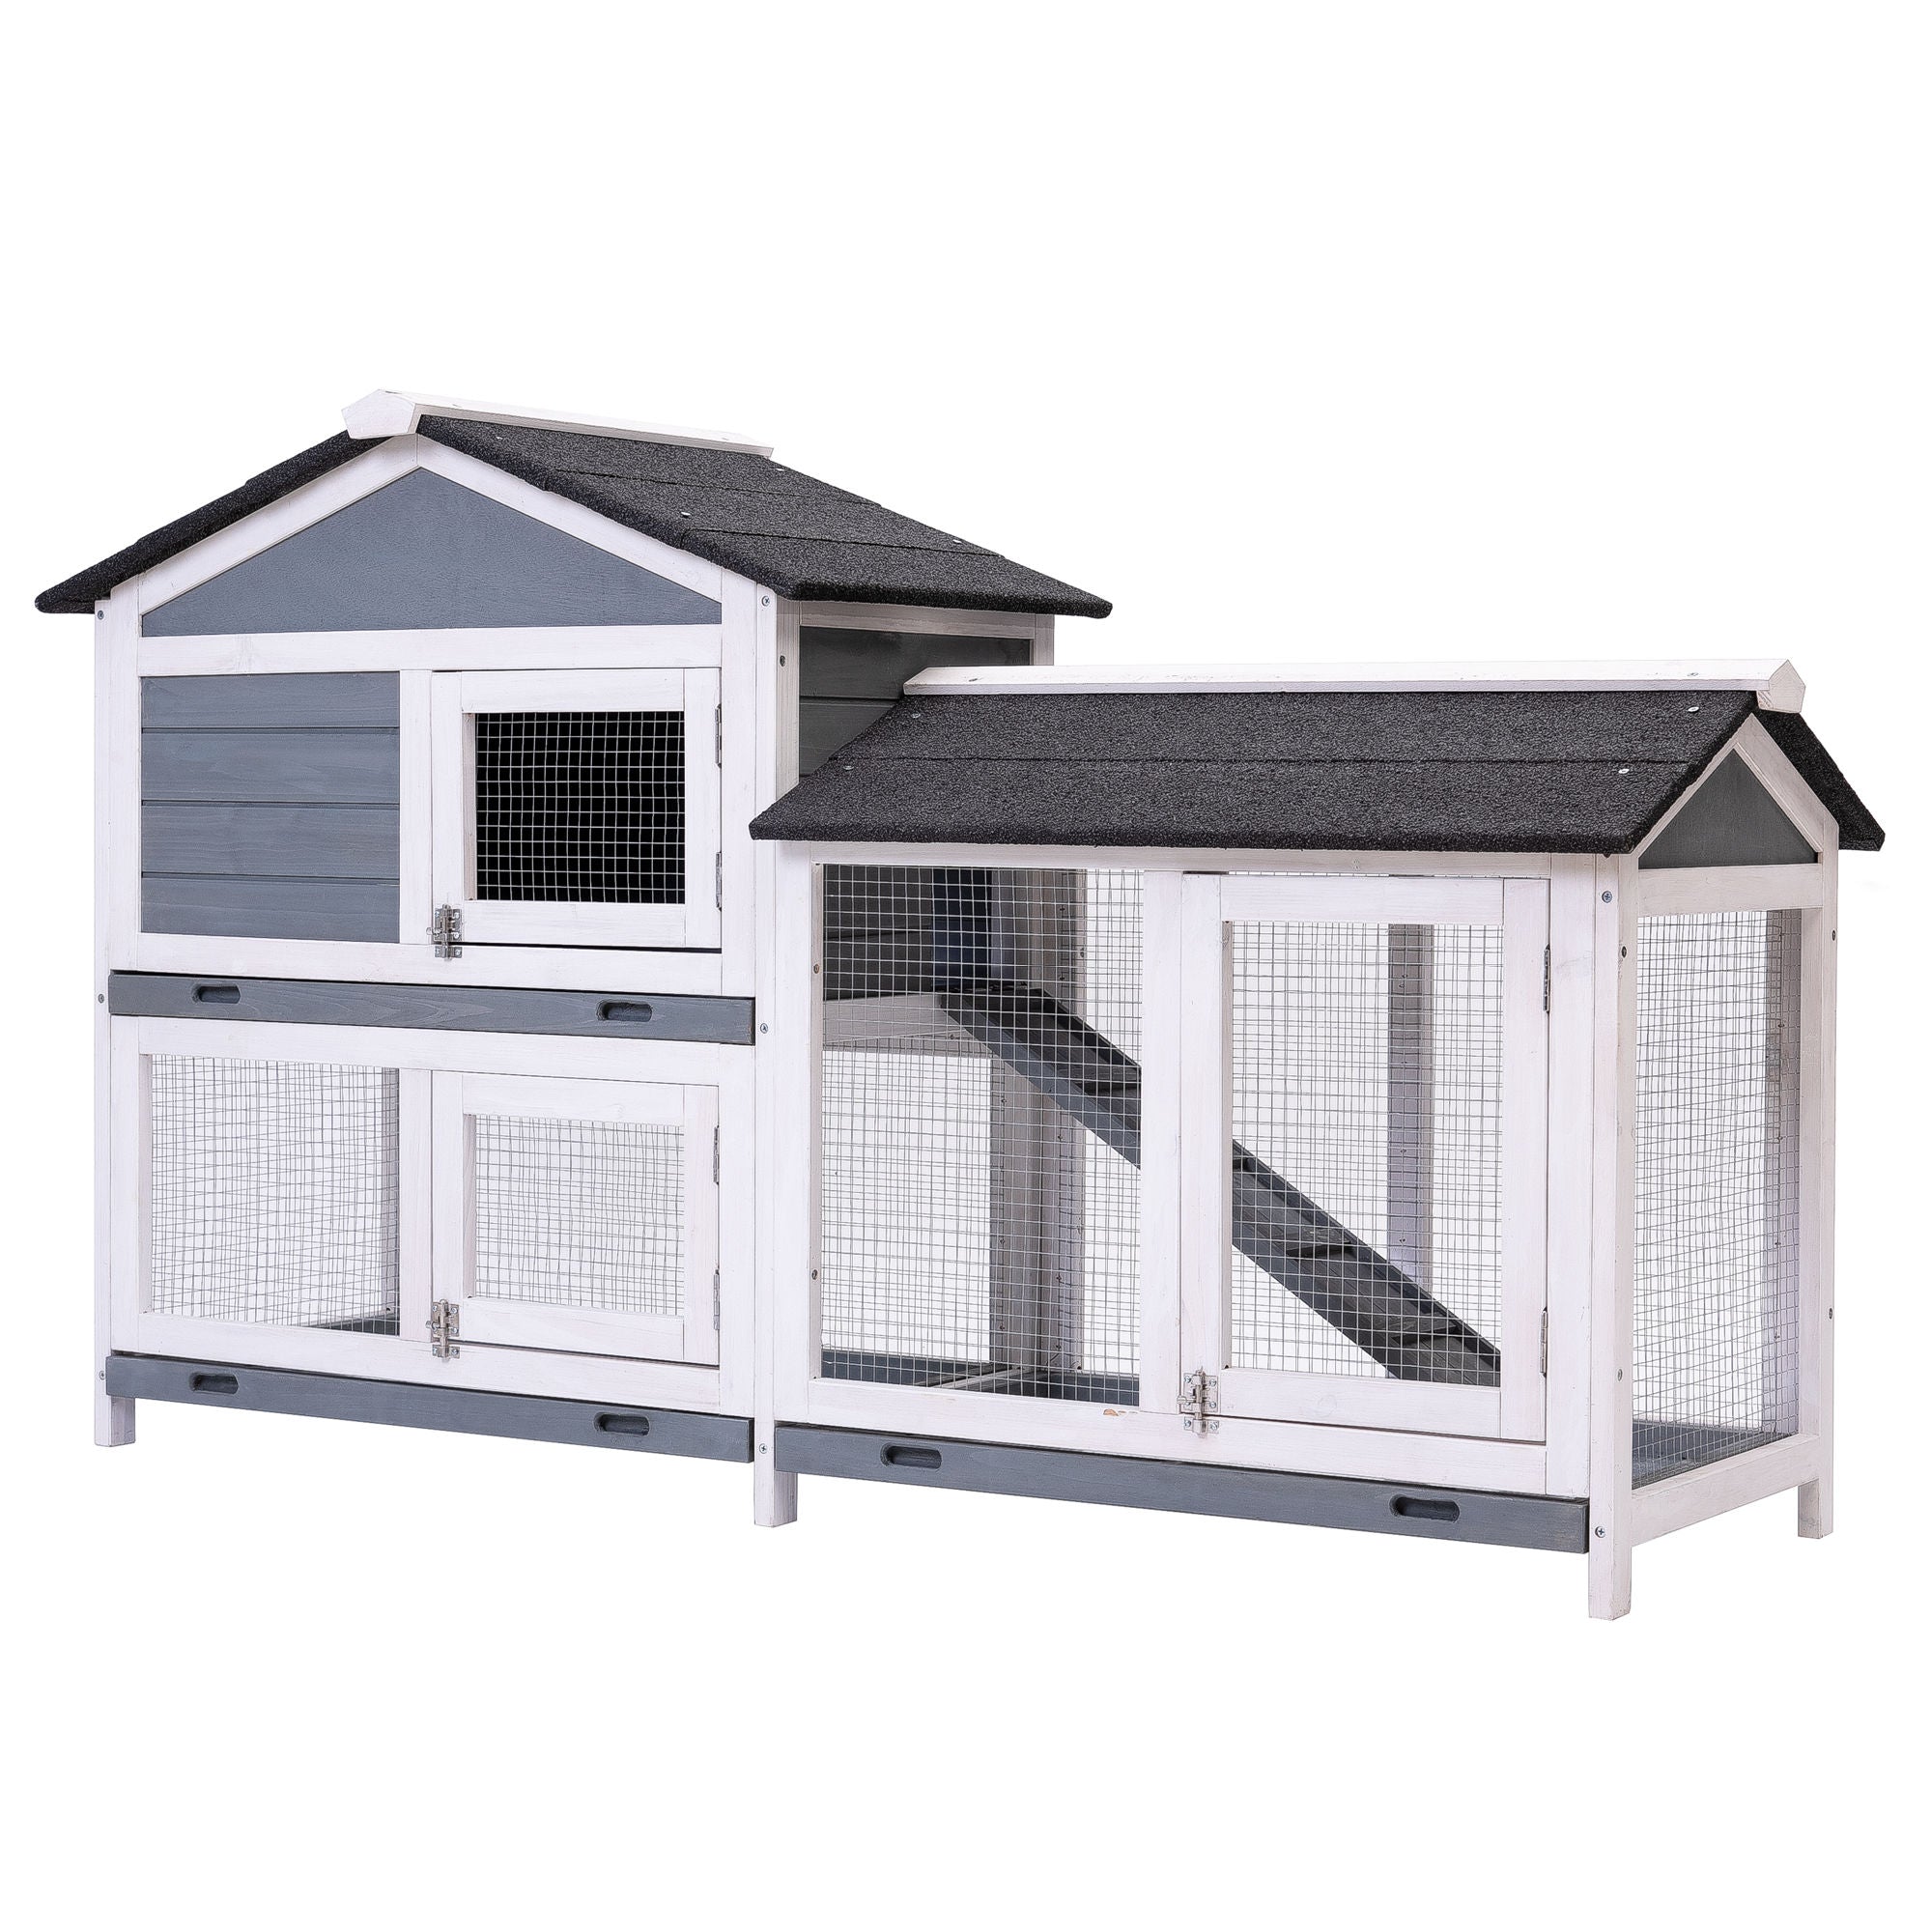 TOPMAX Pet Rabbit Hutch Wooden House Chicken Coop for Small Animals YF